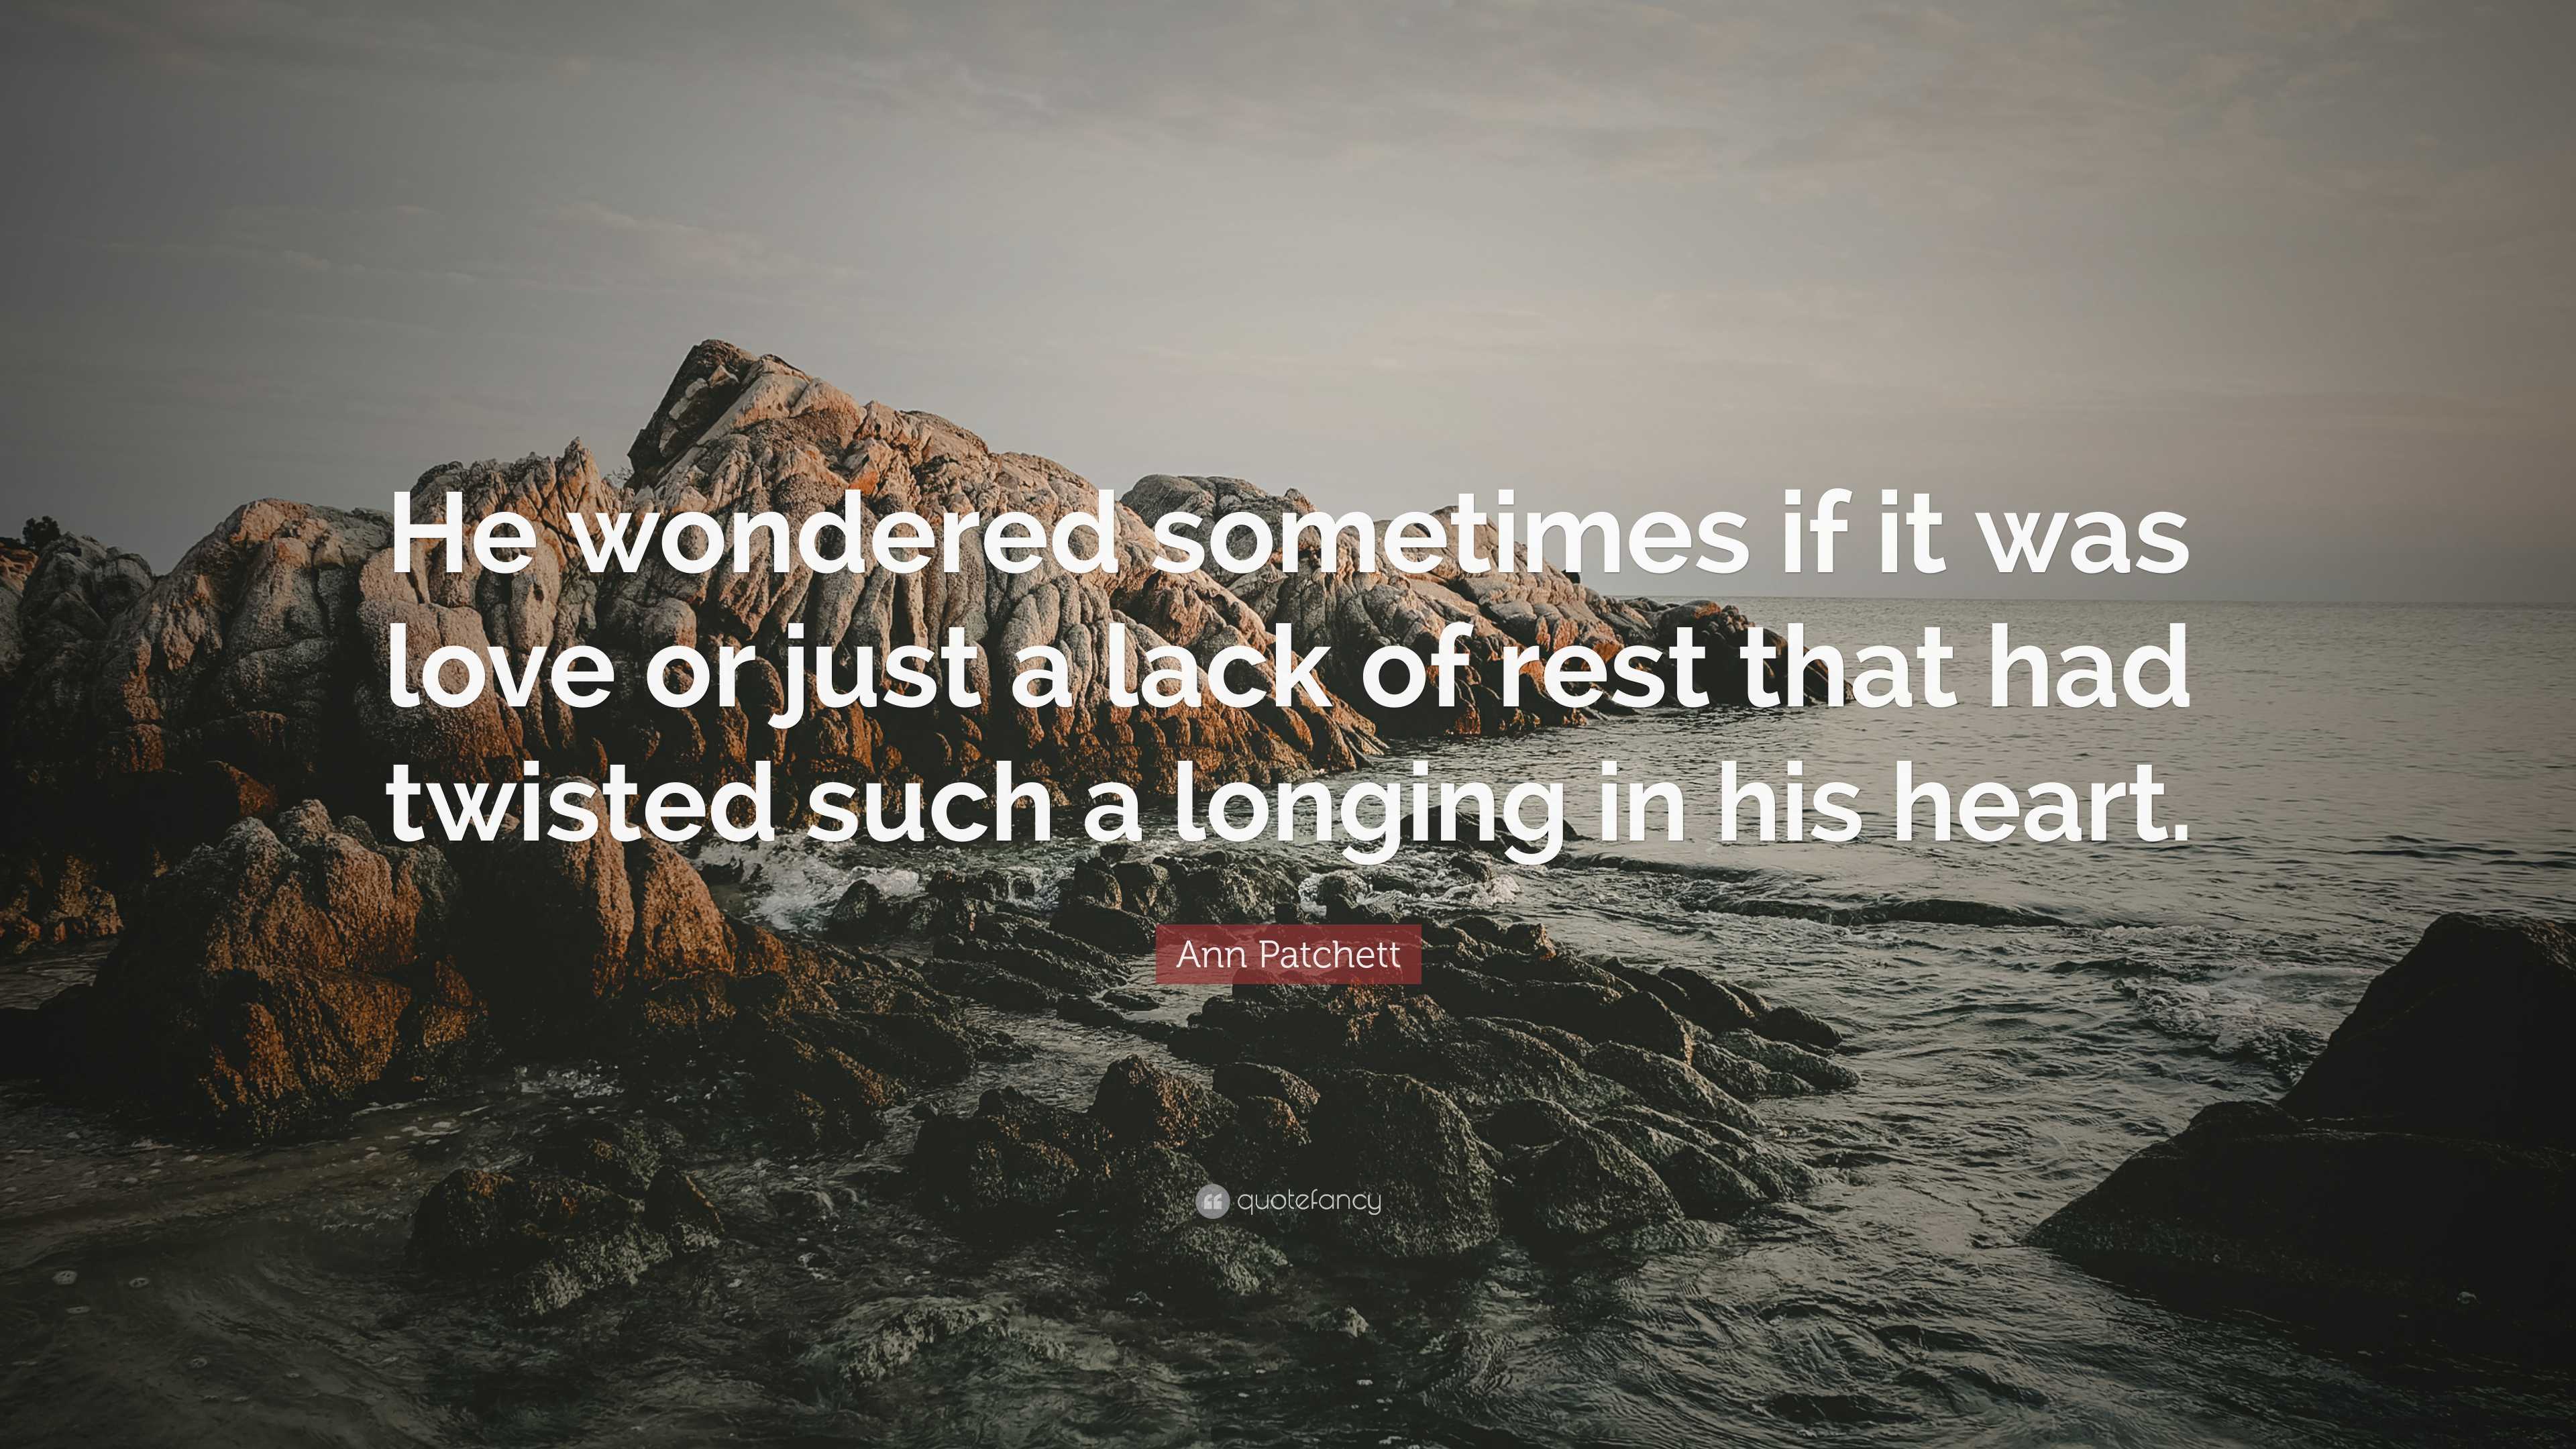 Ann Patchett Quote: “He wondered sometimes if it was love or just a ...